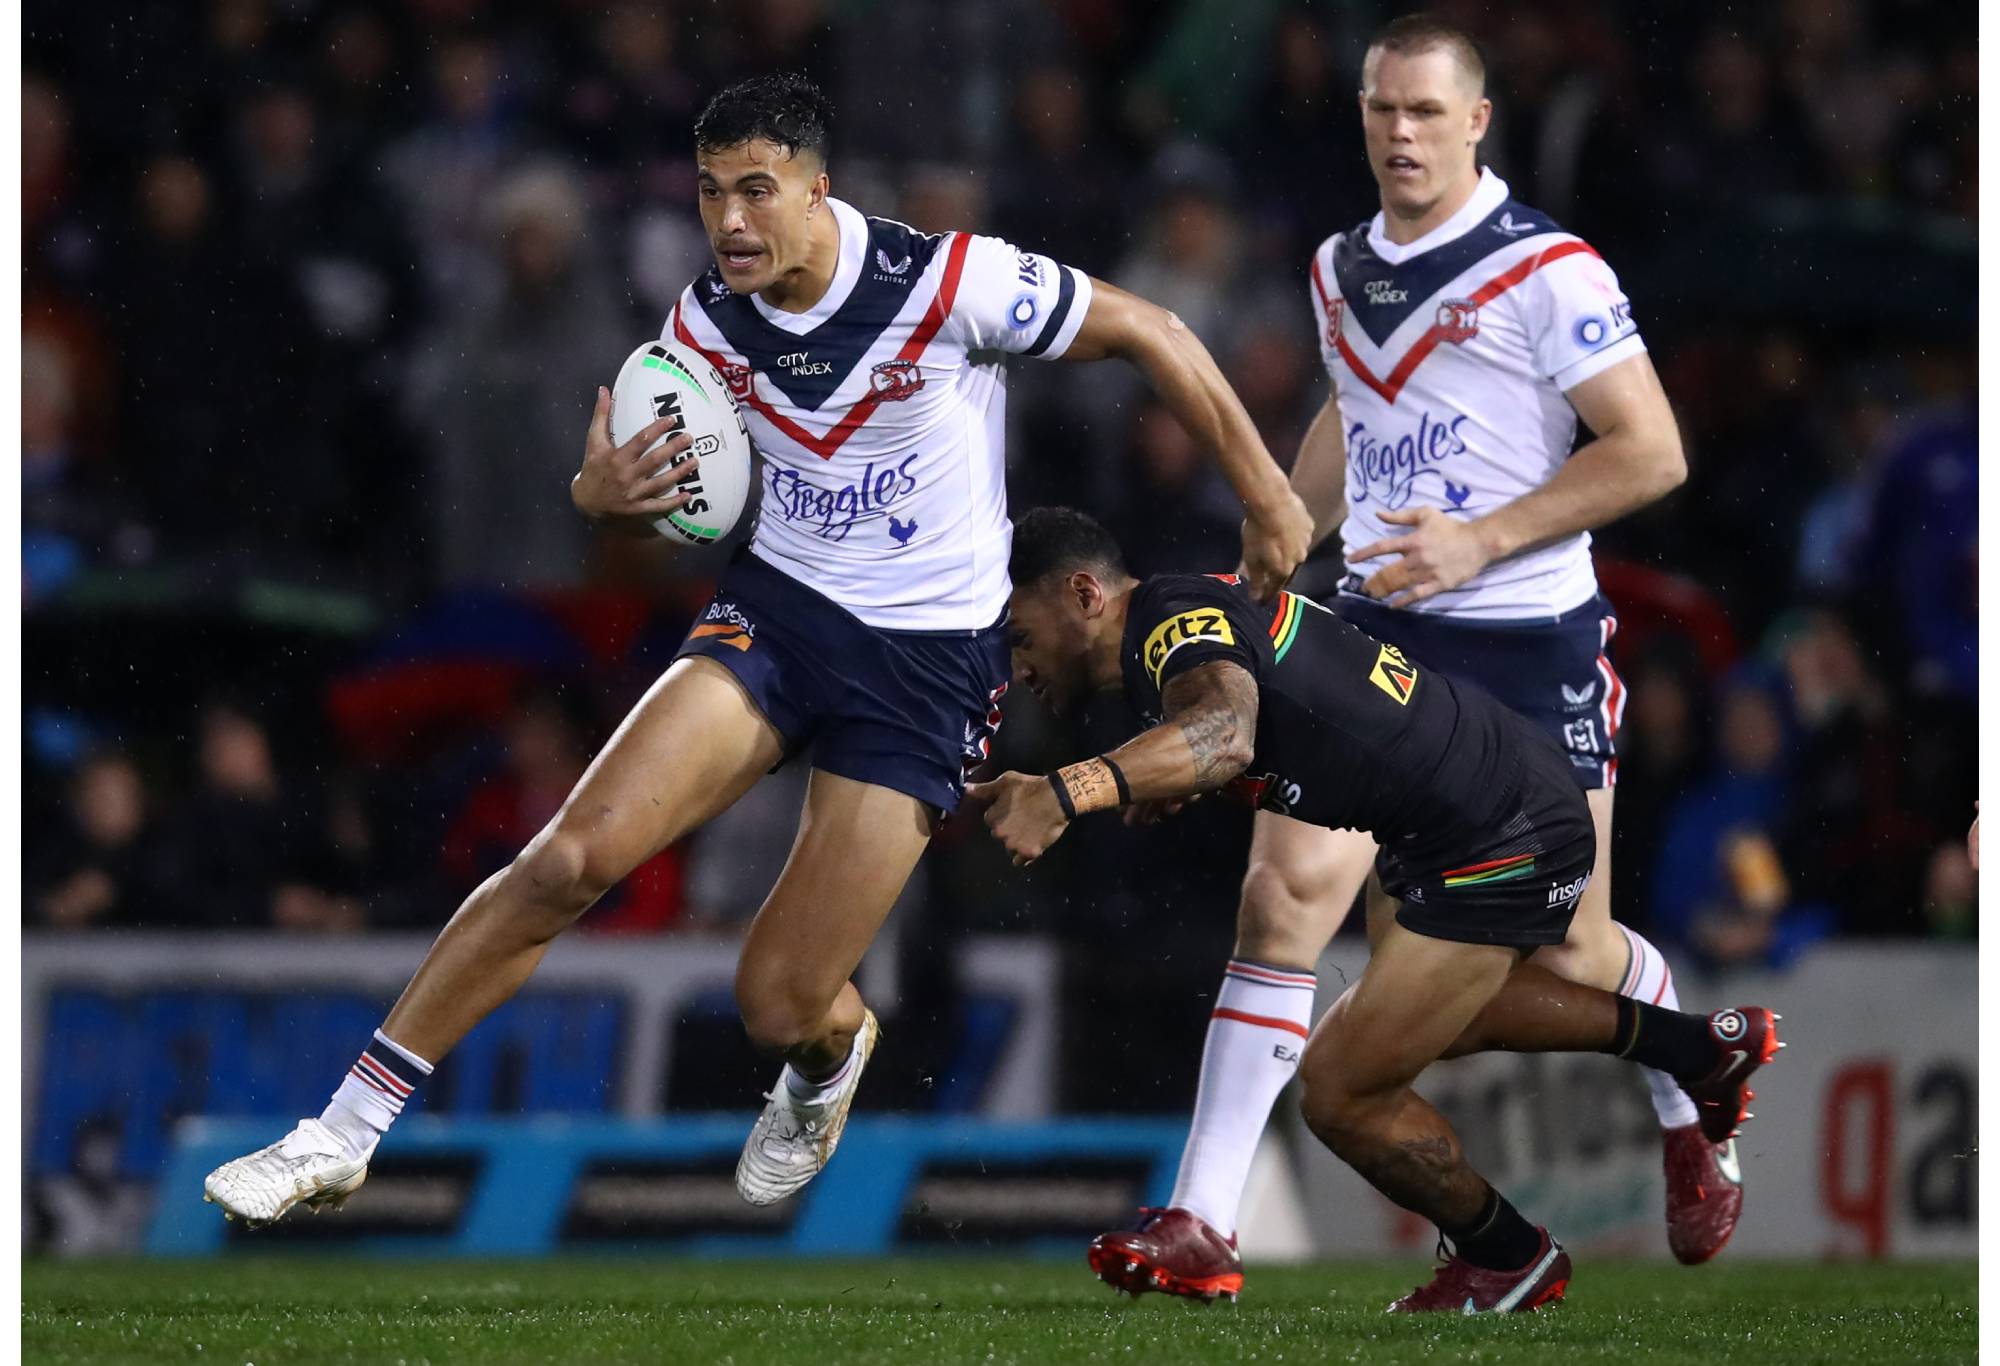 PENRITH, AUSTRALIA - JULY 01: Joseph Suaalii of the Roosters runs the ball during the round 16 NRL match between the Penrith Panthers and the Sydney Roosters at BlueBet Stadium on July 01, 2022 in Penrith, Australia. (Photo by Jason McCawley/Getty Images)